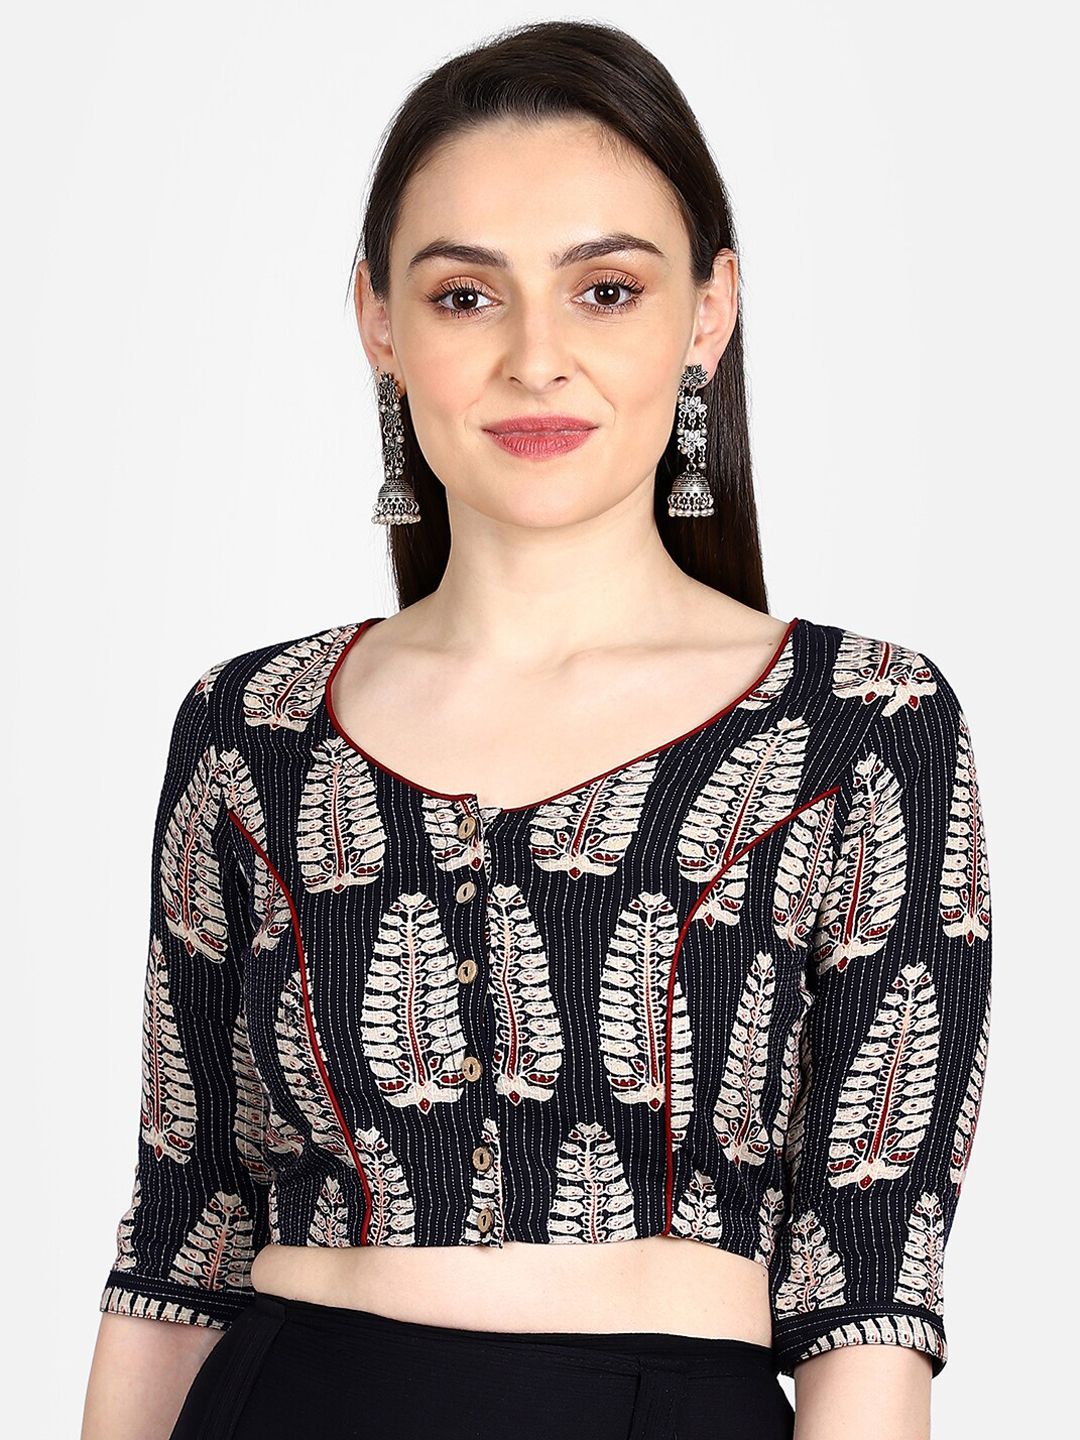 THE WEAVE TRAVELLER Women Black & Beige Ajrakh Hand Block Printed Sustainable Saree Blouse Price in India